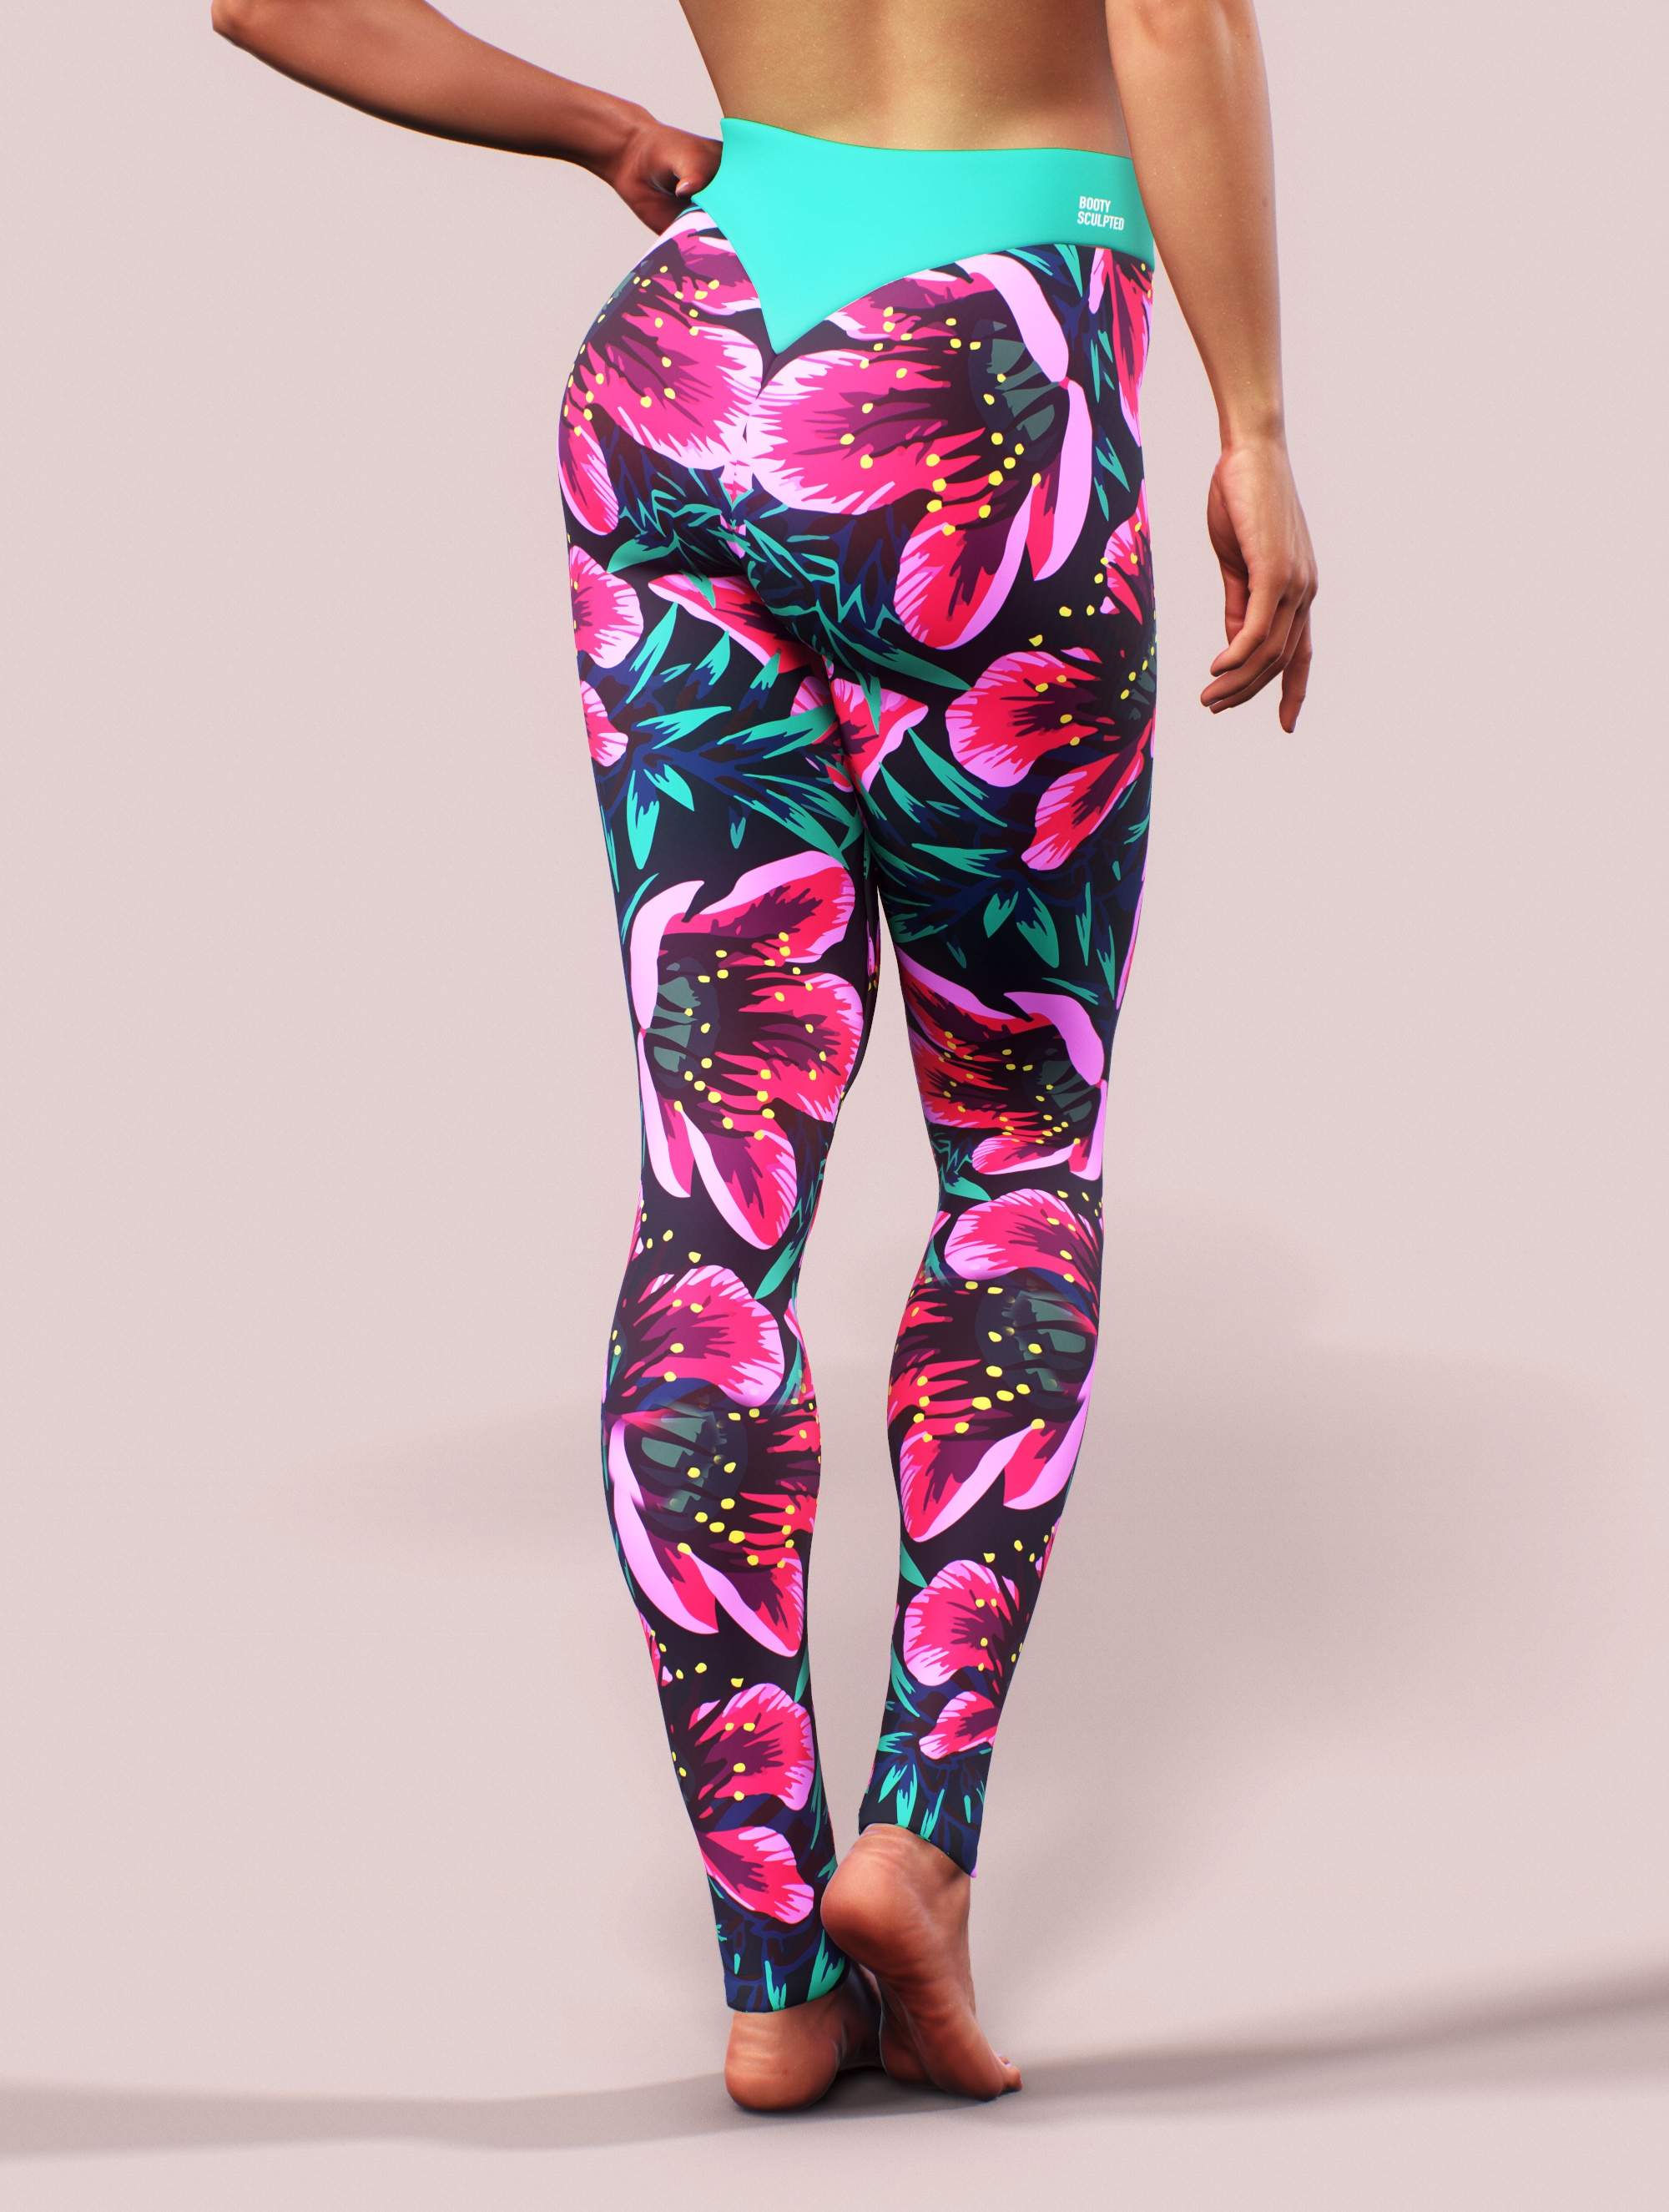 Floral Lilly Yoga Pants - S